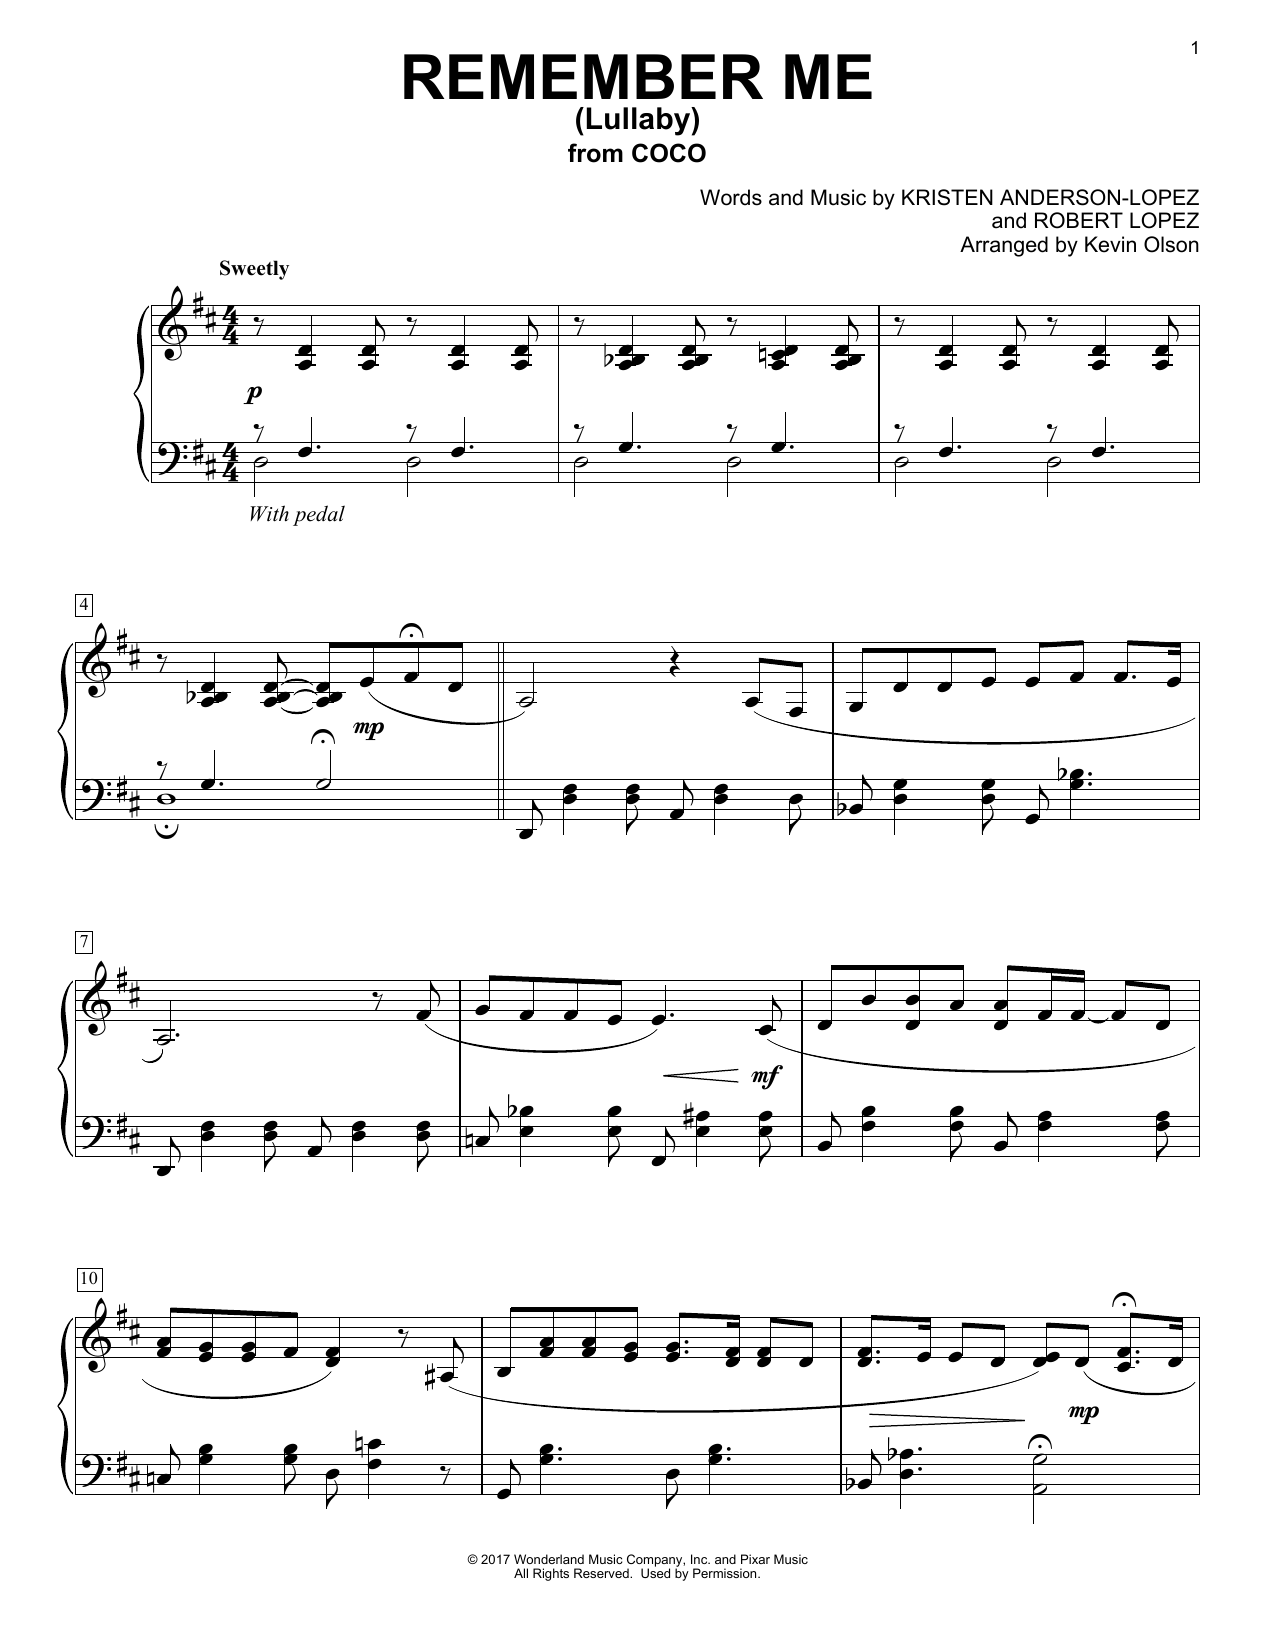 Download Kristen Anderson-Lopez & Robert Lope Remember Me (Lullaby) (from Coco) (arr. Sheet Music